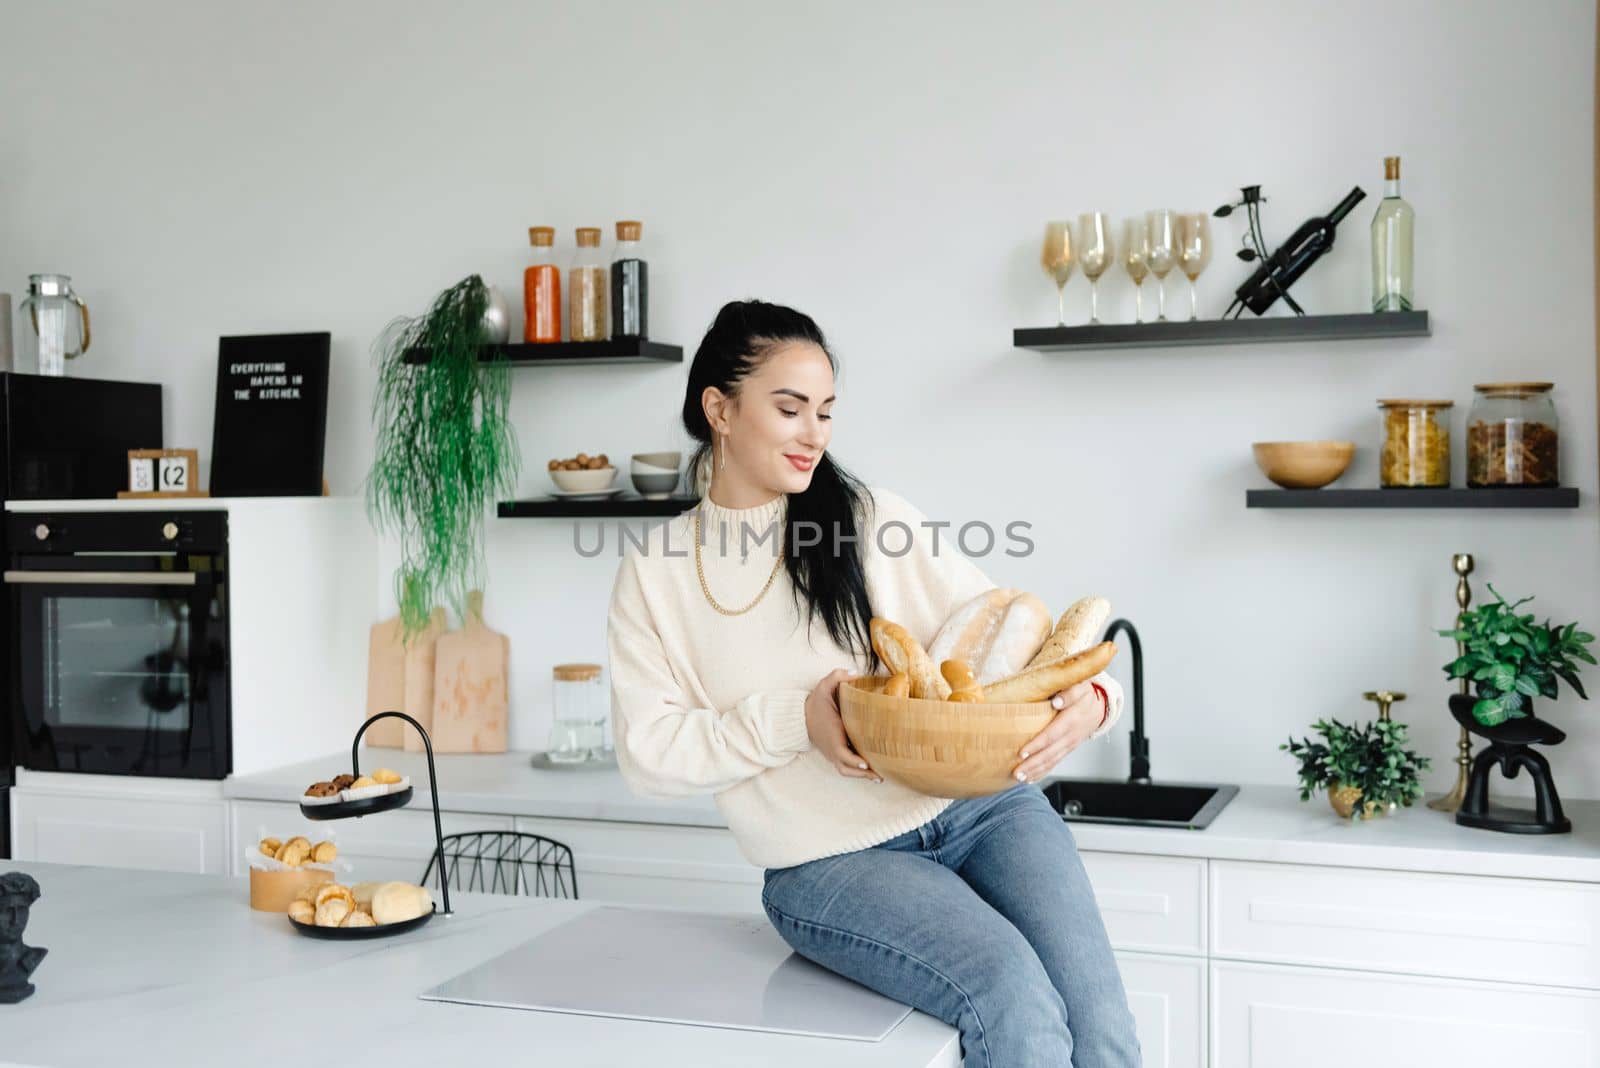 A woman sits in her kitchen holding a bread basket. Enjoying the little things. Lykke Concepts. Relaxation Concepts by gulyaevstudio